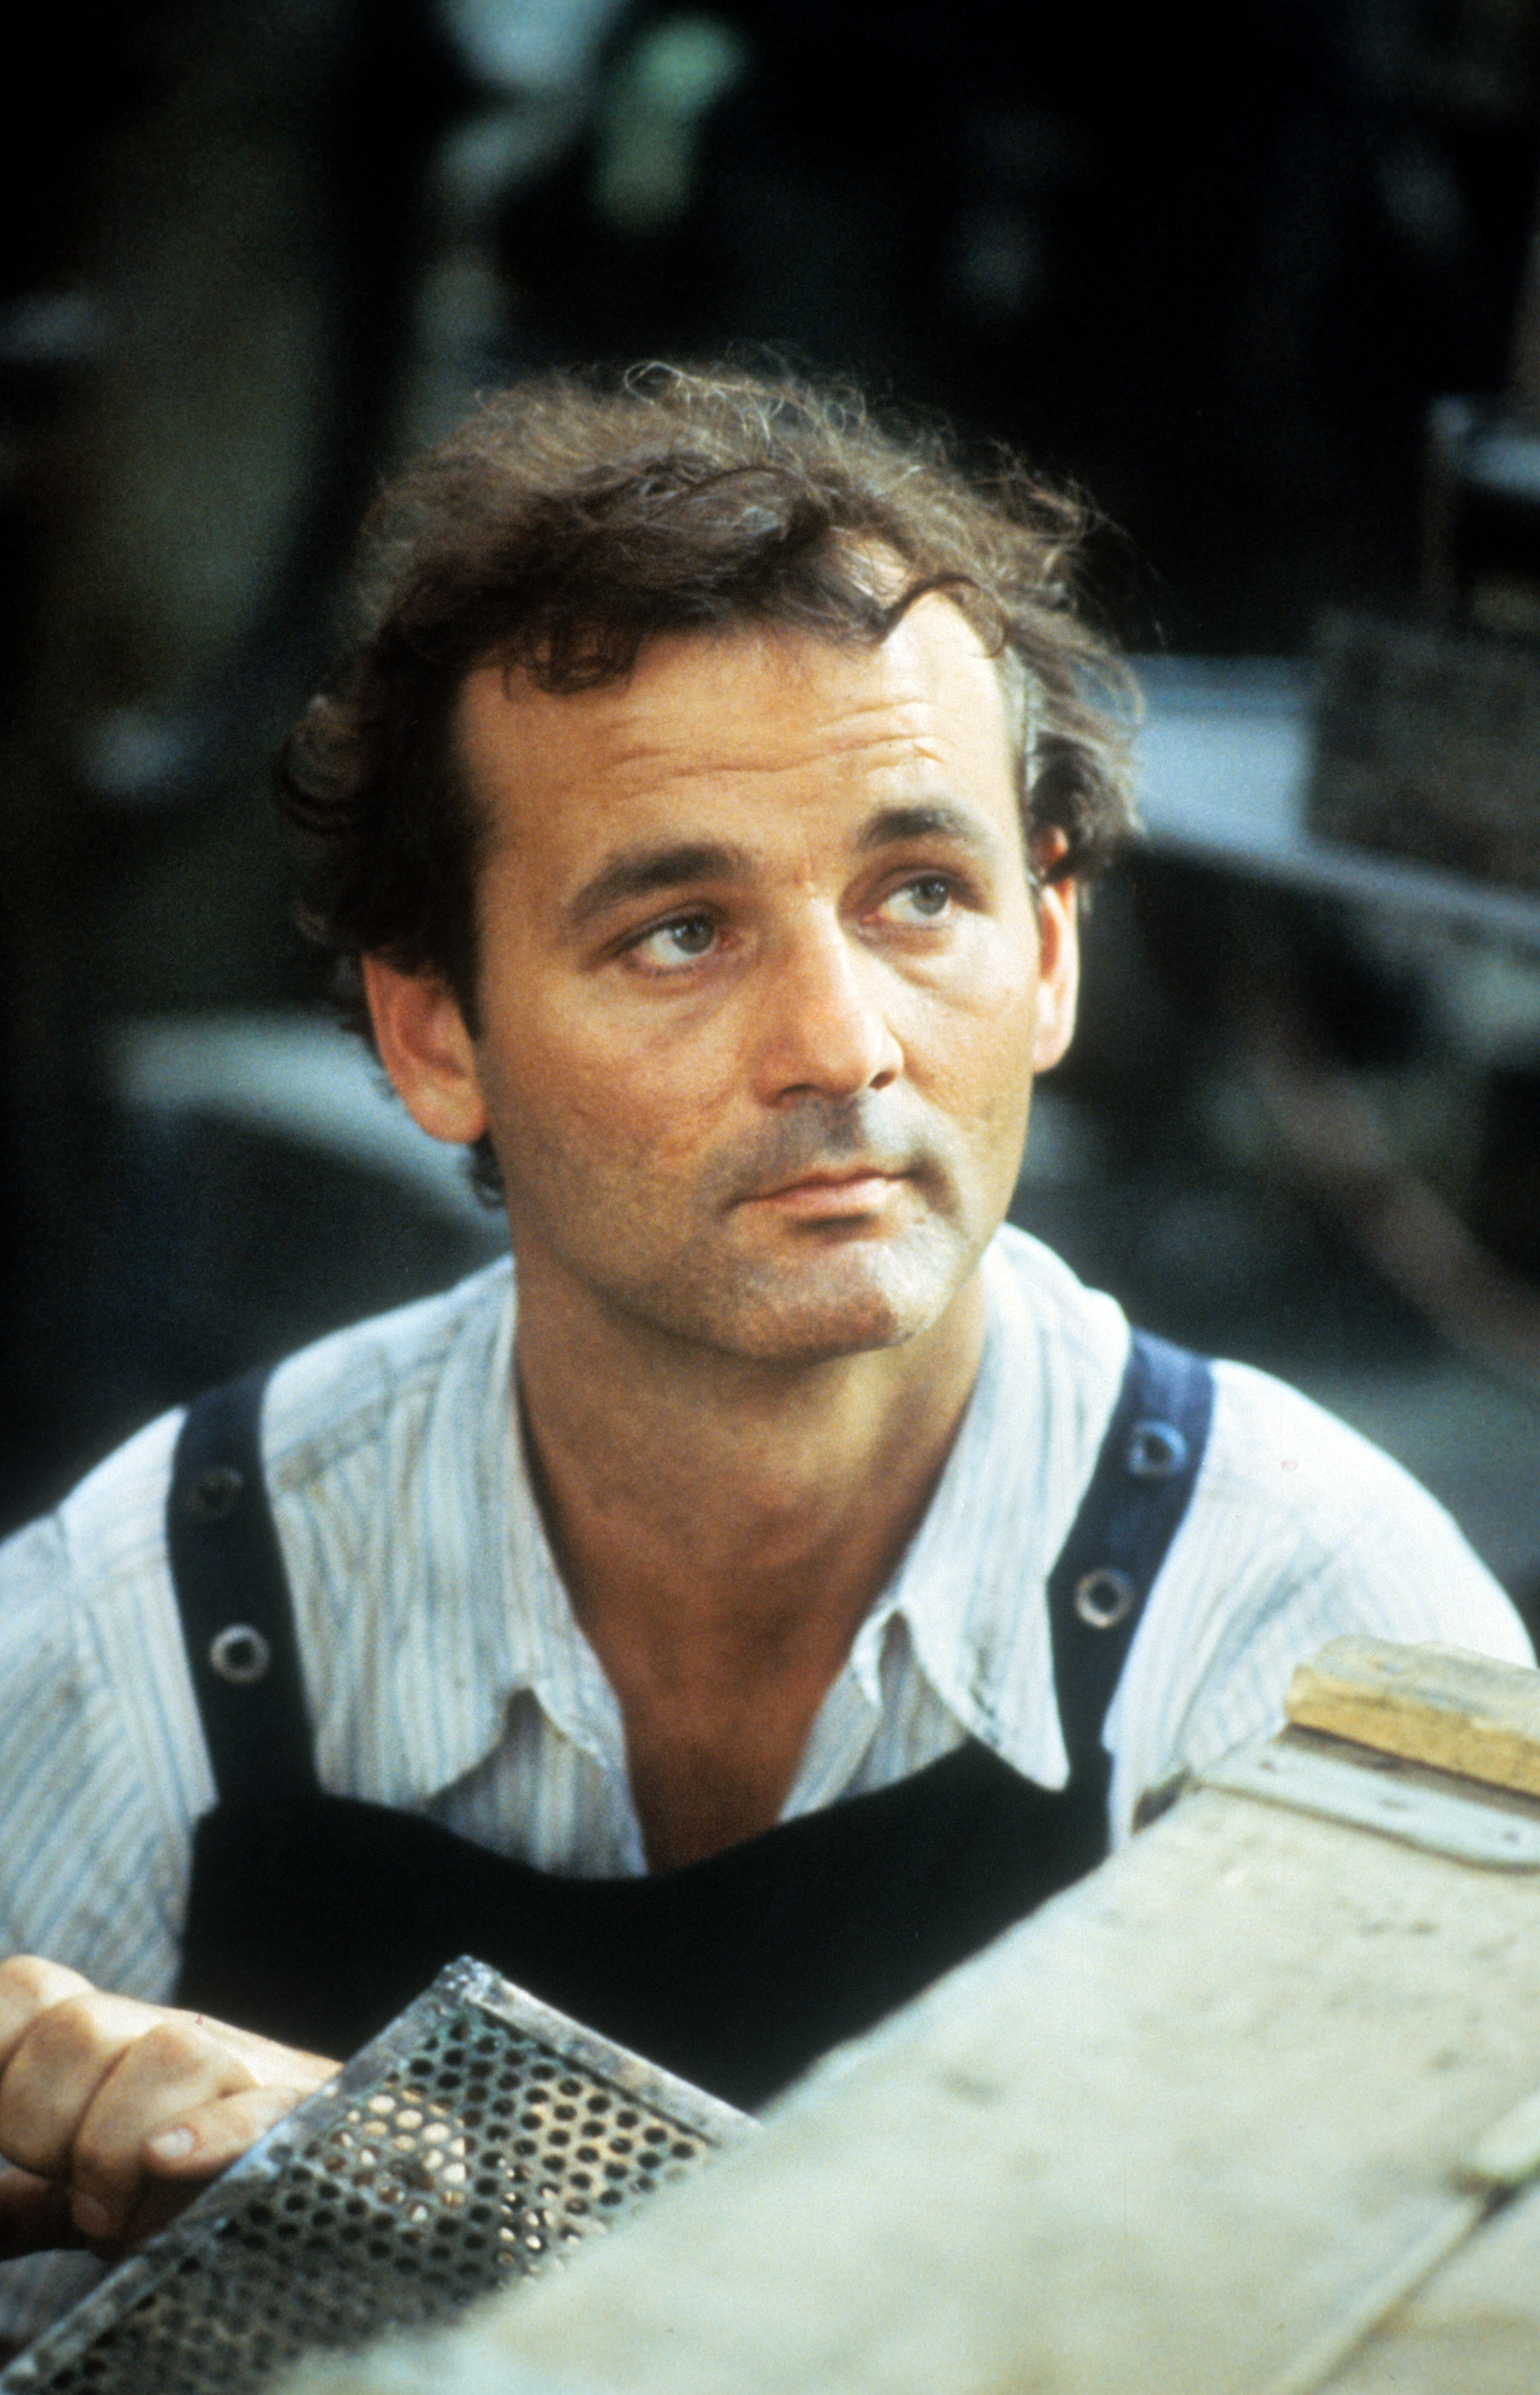 Bill Murray in a scene from the film 'The Razor's Edge', 1984 | Source: Getty Images